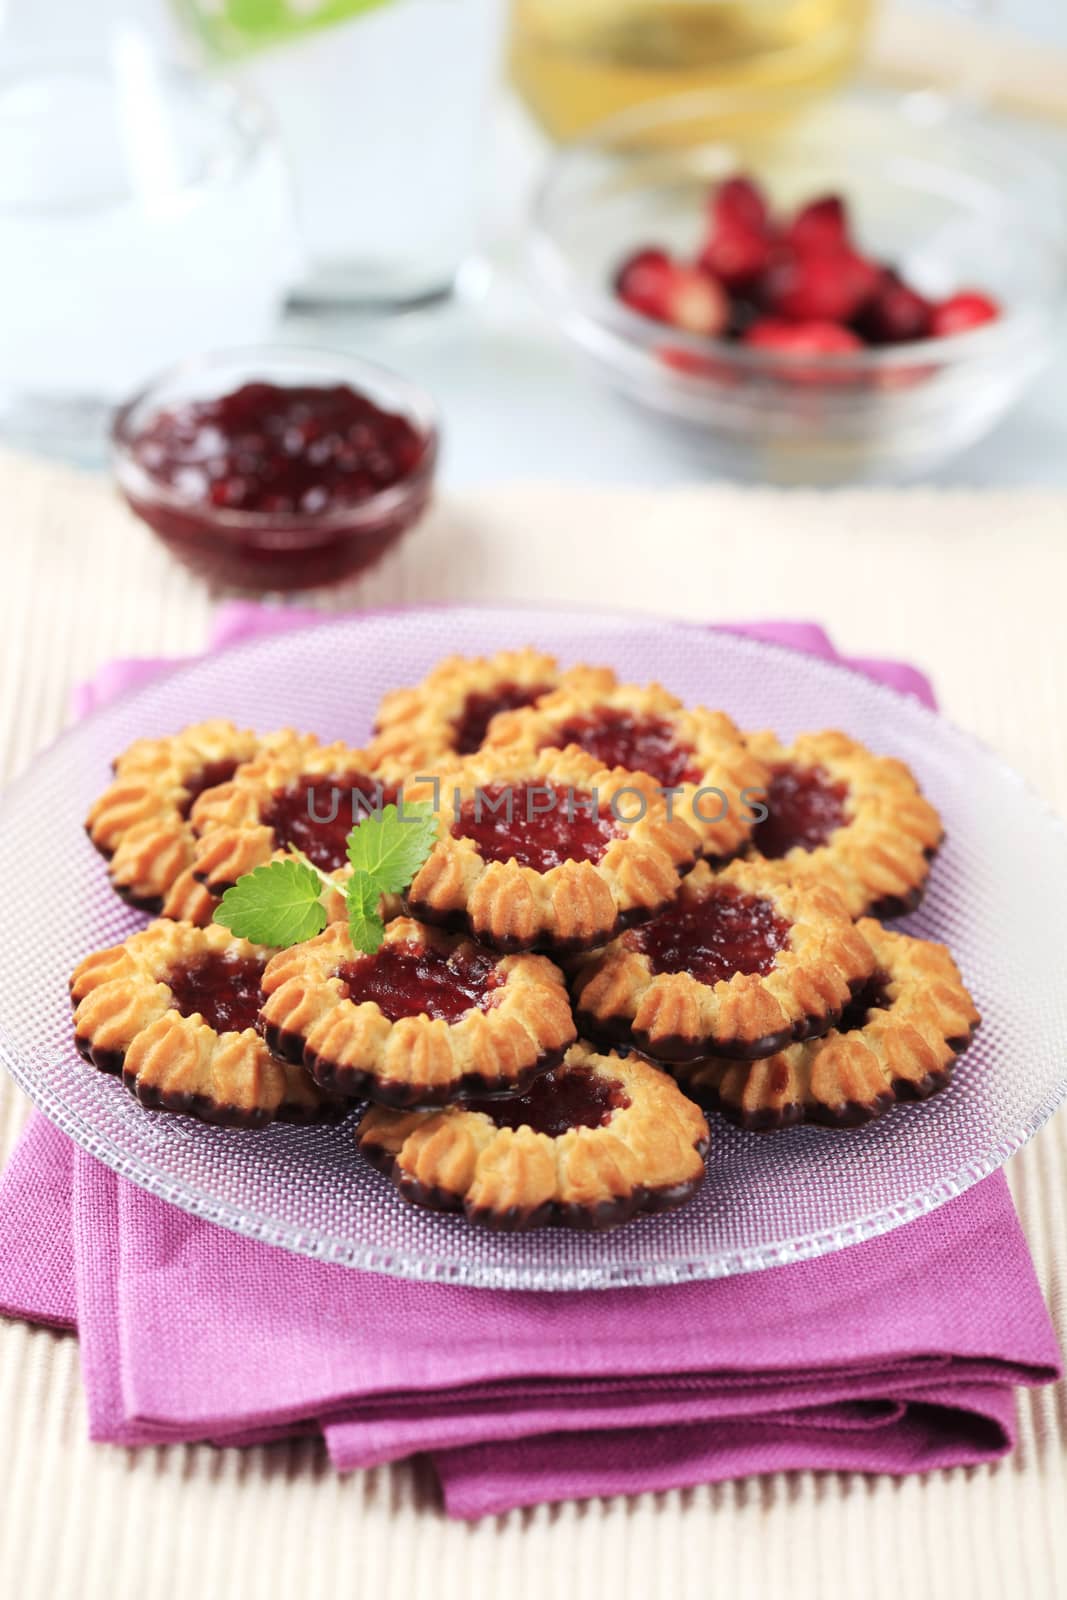 Chocolate dipped butter cookies with jam centers